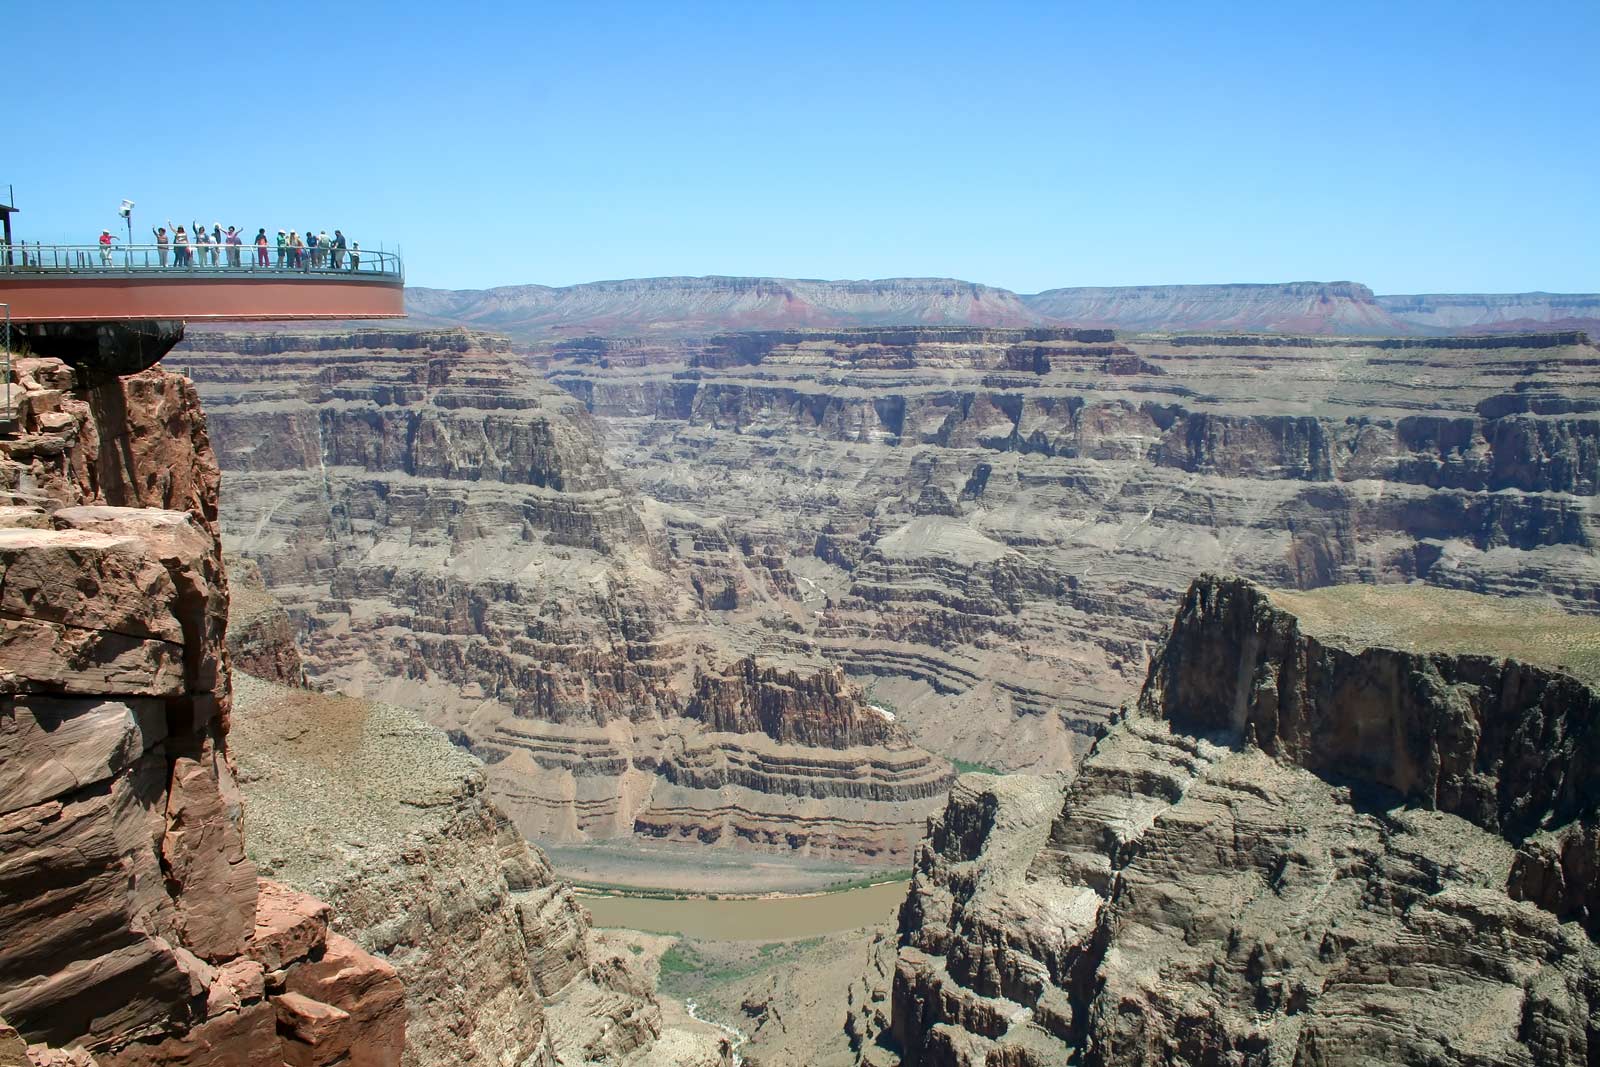 Where to stay in the Grand Canyon West Rim